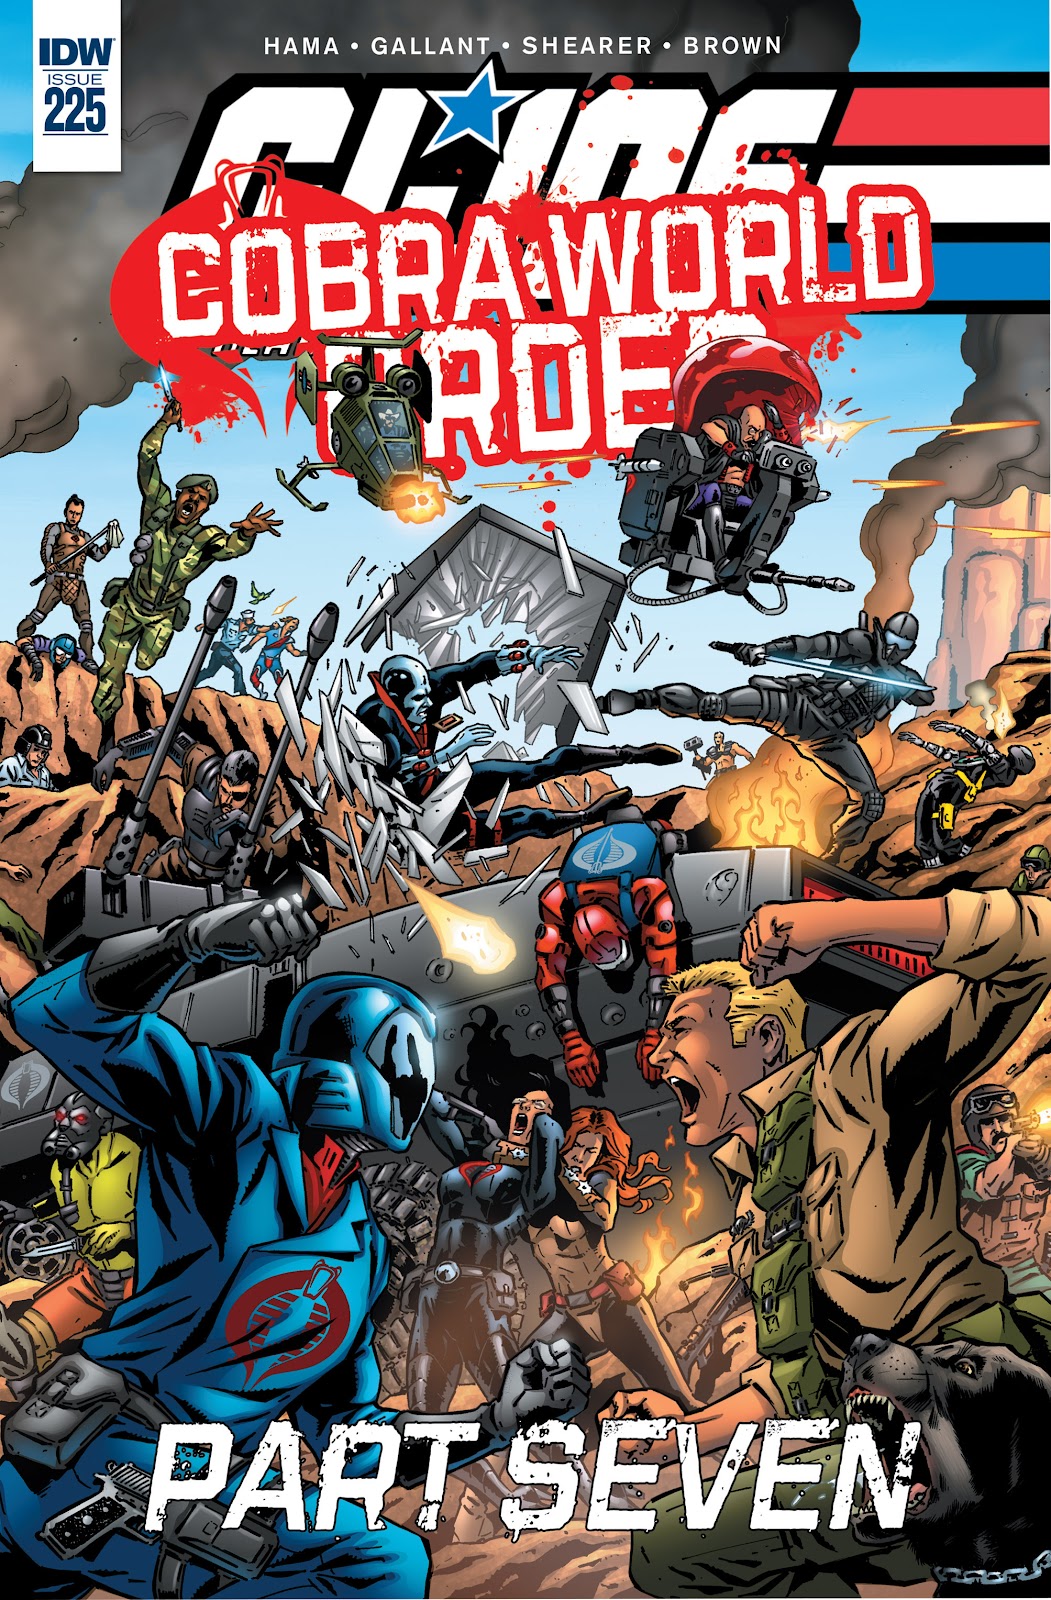 G.I. Joe: A Real American Hero issue 225 - Page 1